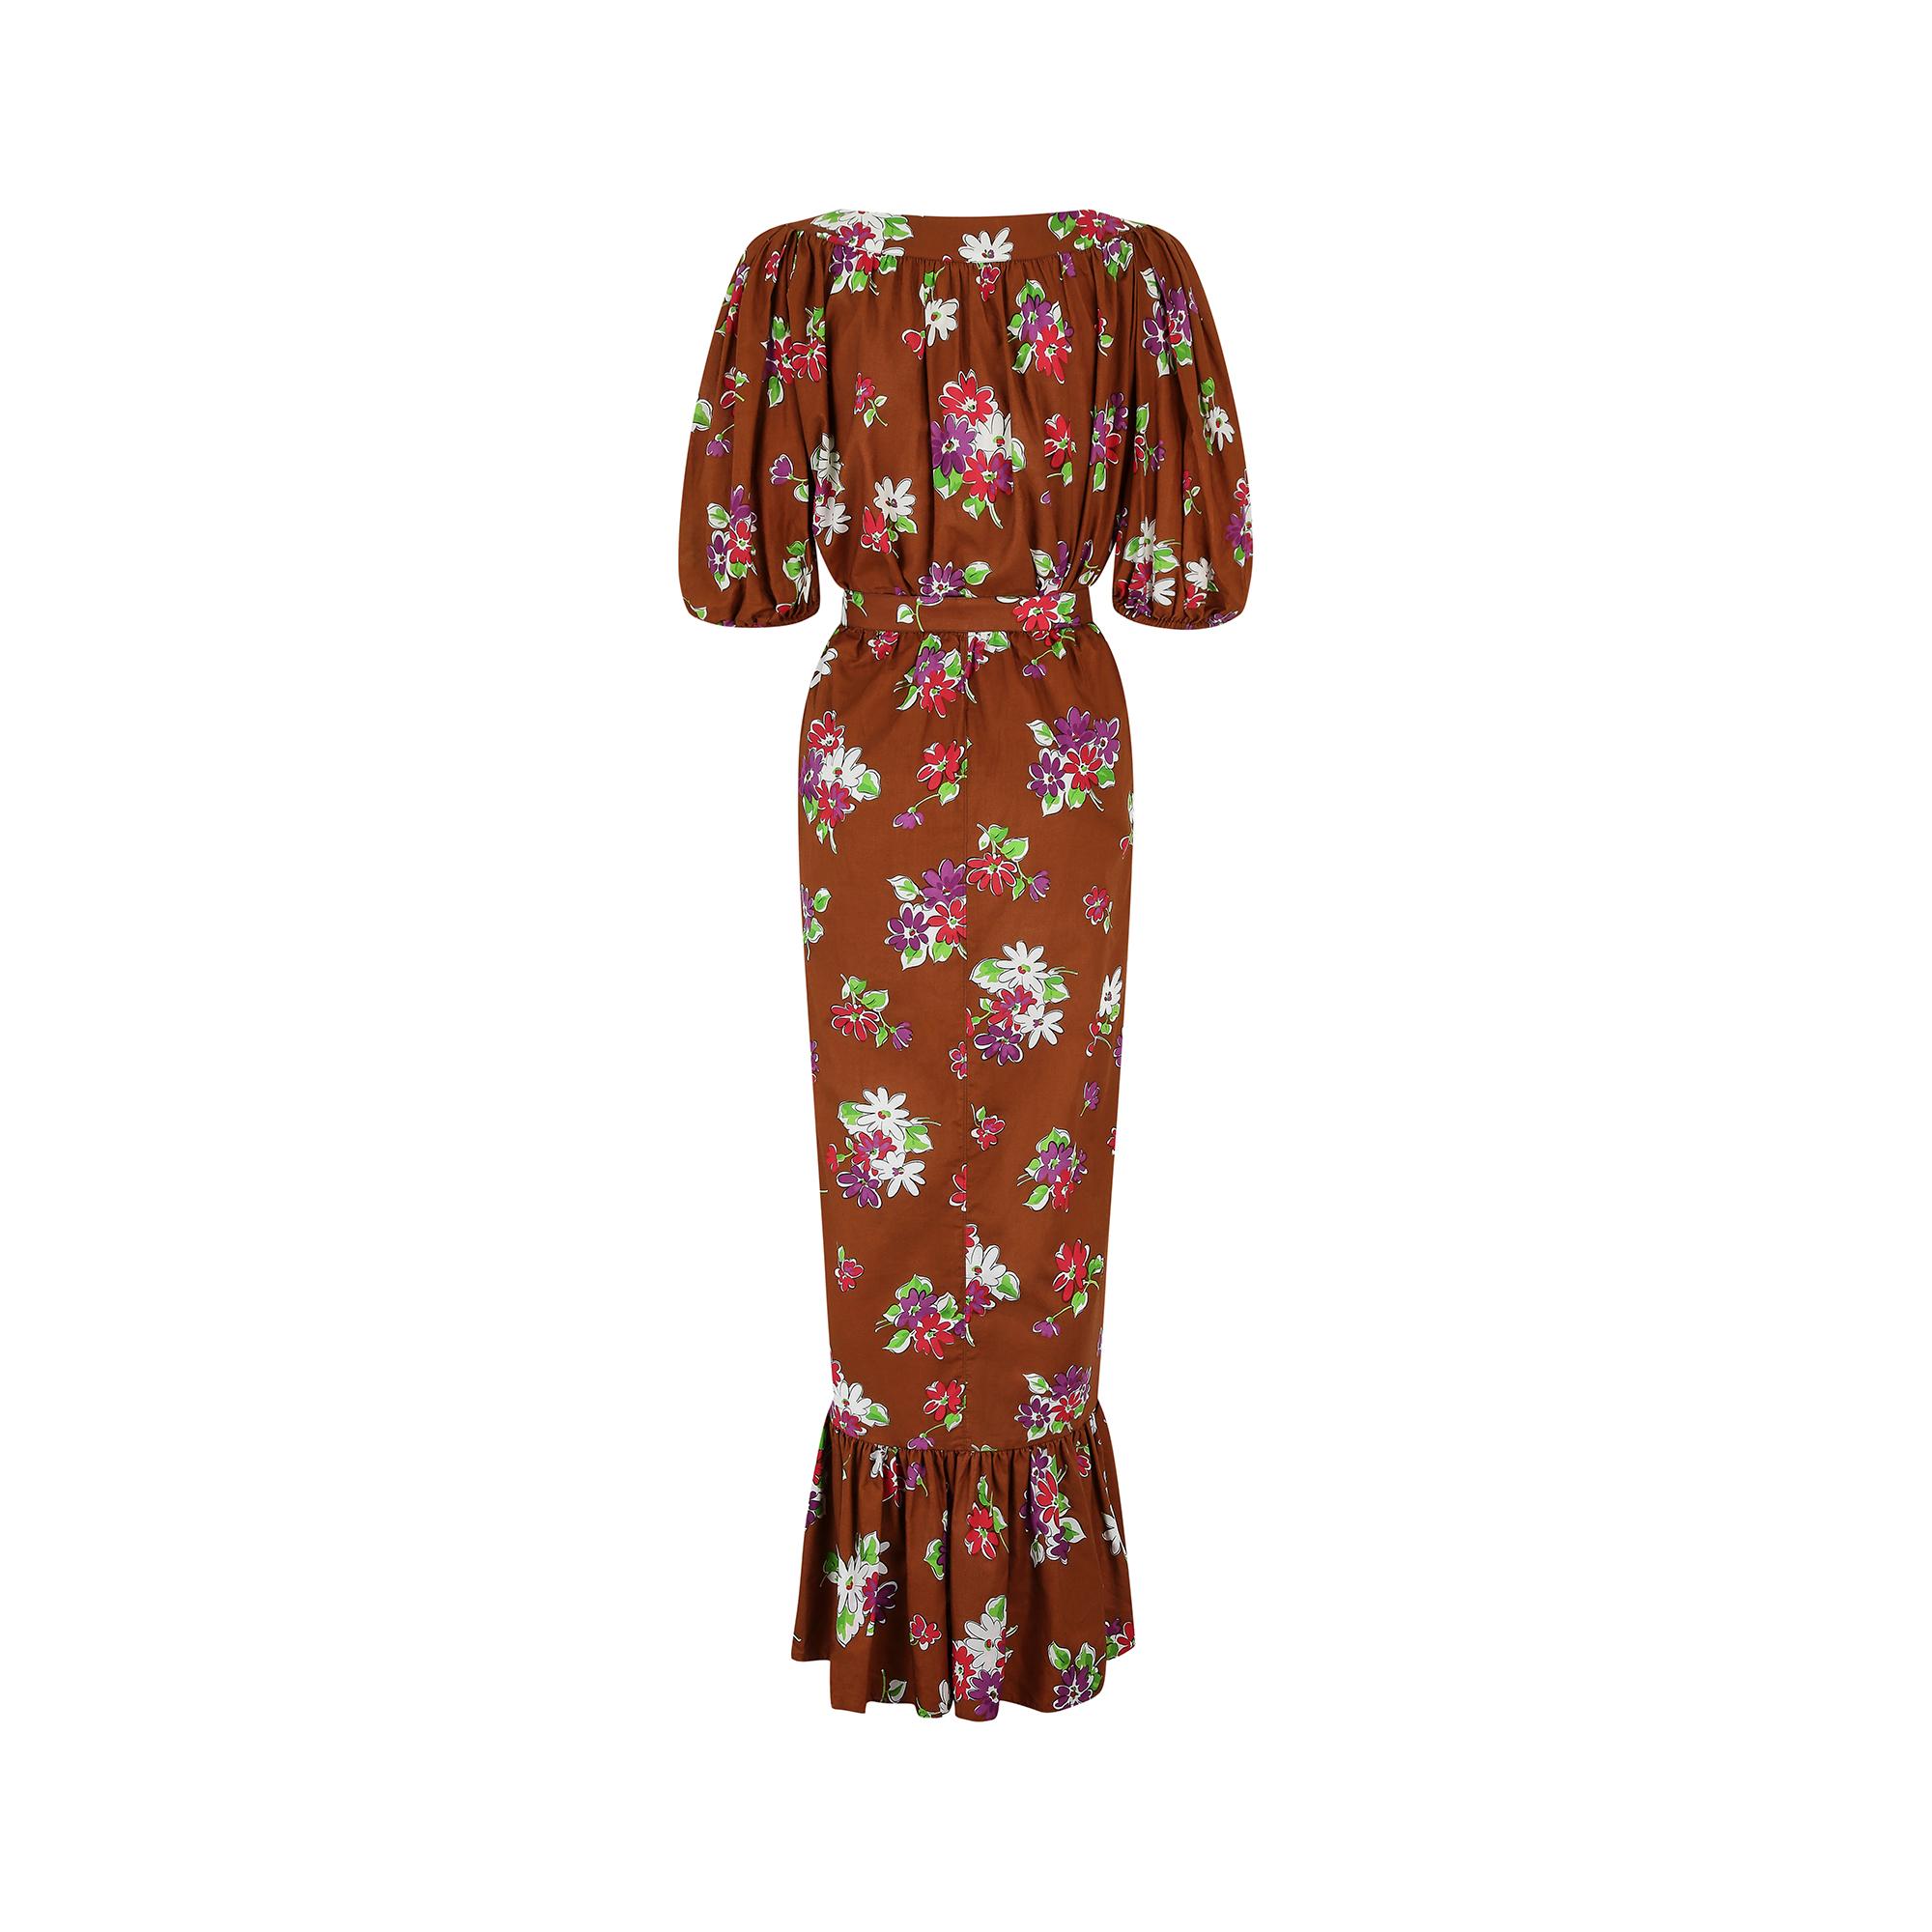 1984 Runway Documented Yves Saint Laurent Floral Skirt Suit In Excellent Condition For Sale In London, GB